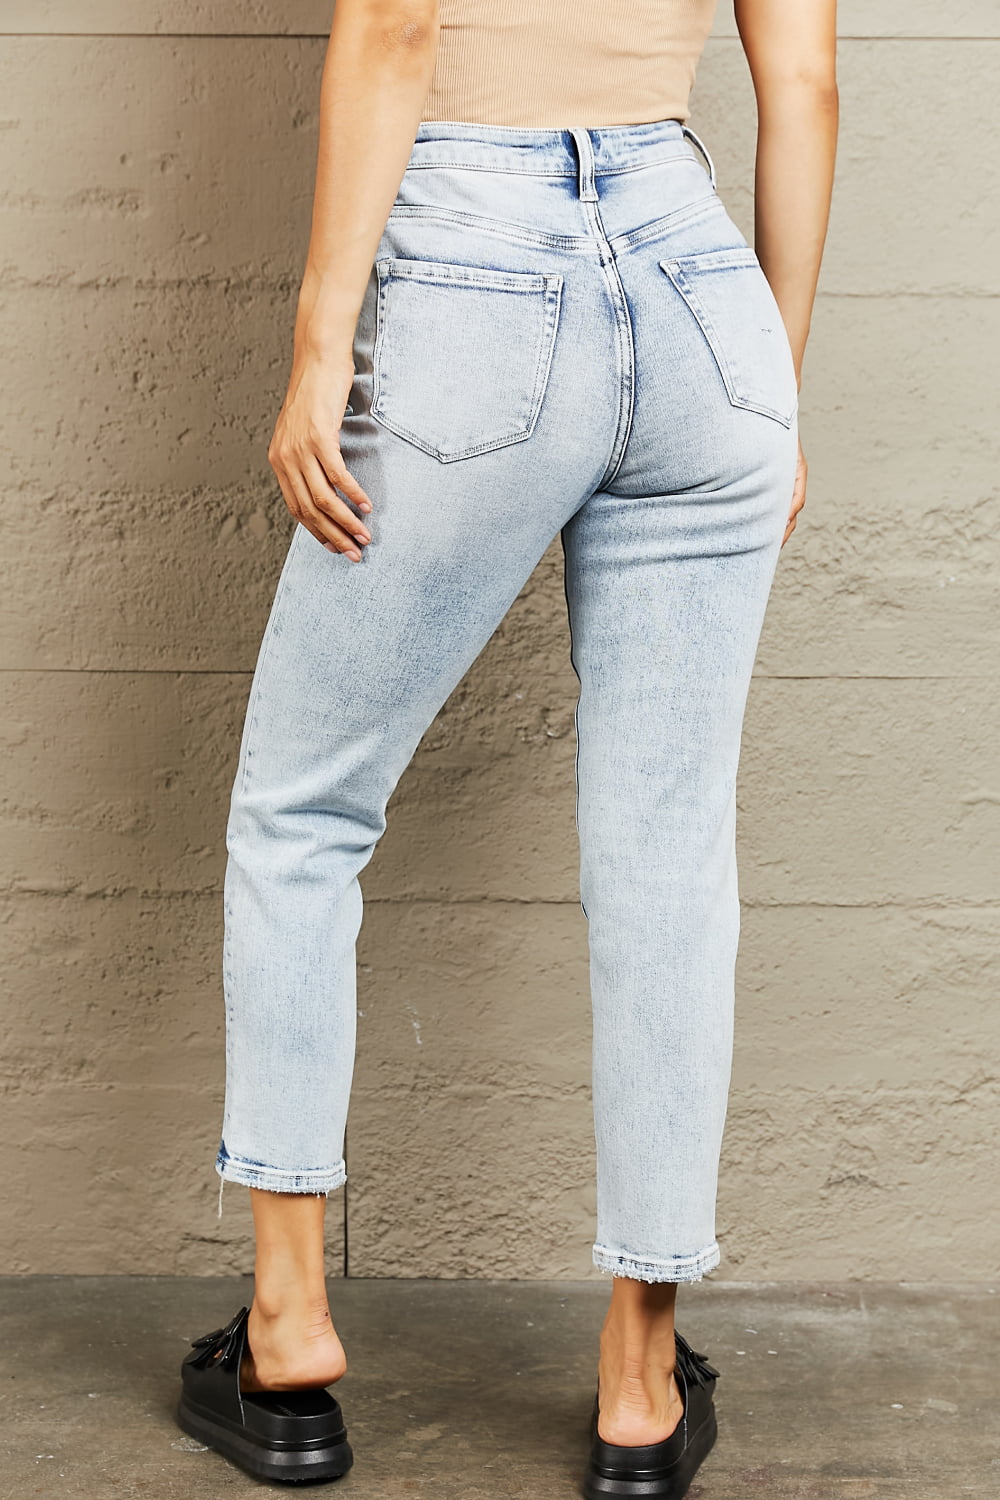 High Waisted Accent Skinny Jeans | Tigbuls Variety Fashion